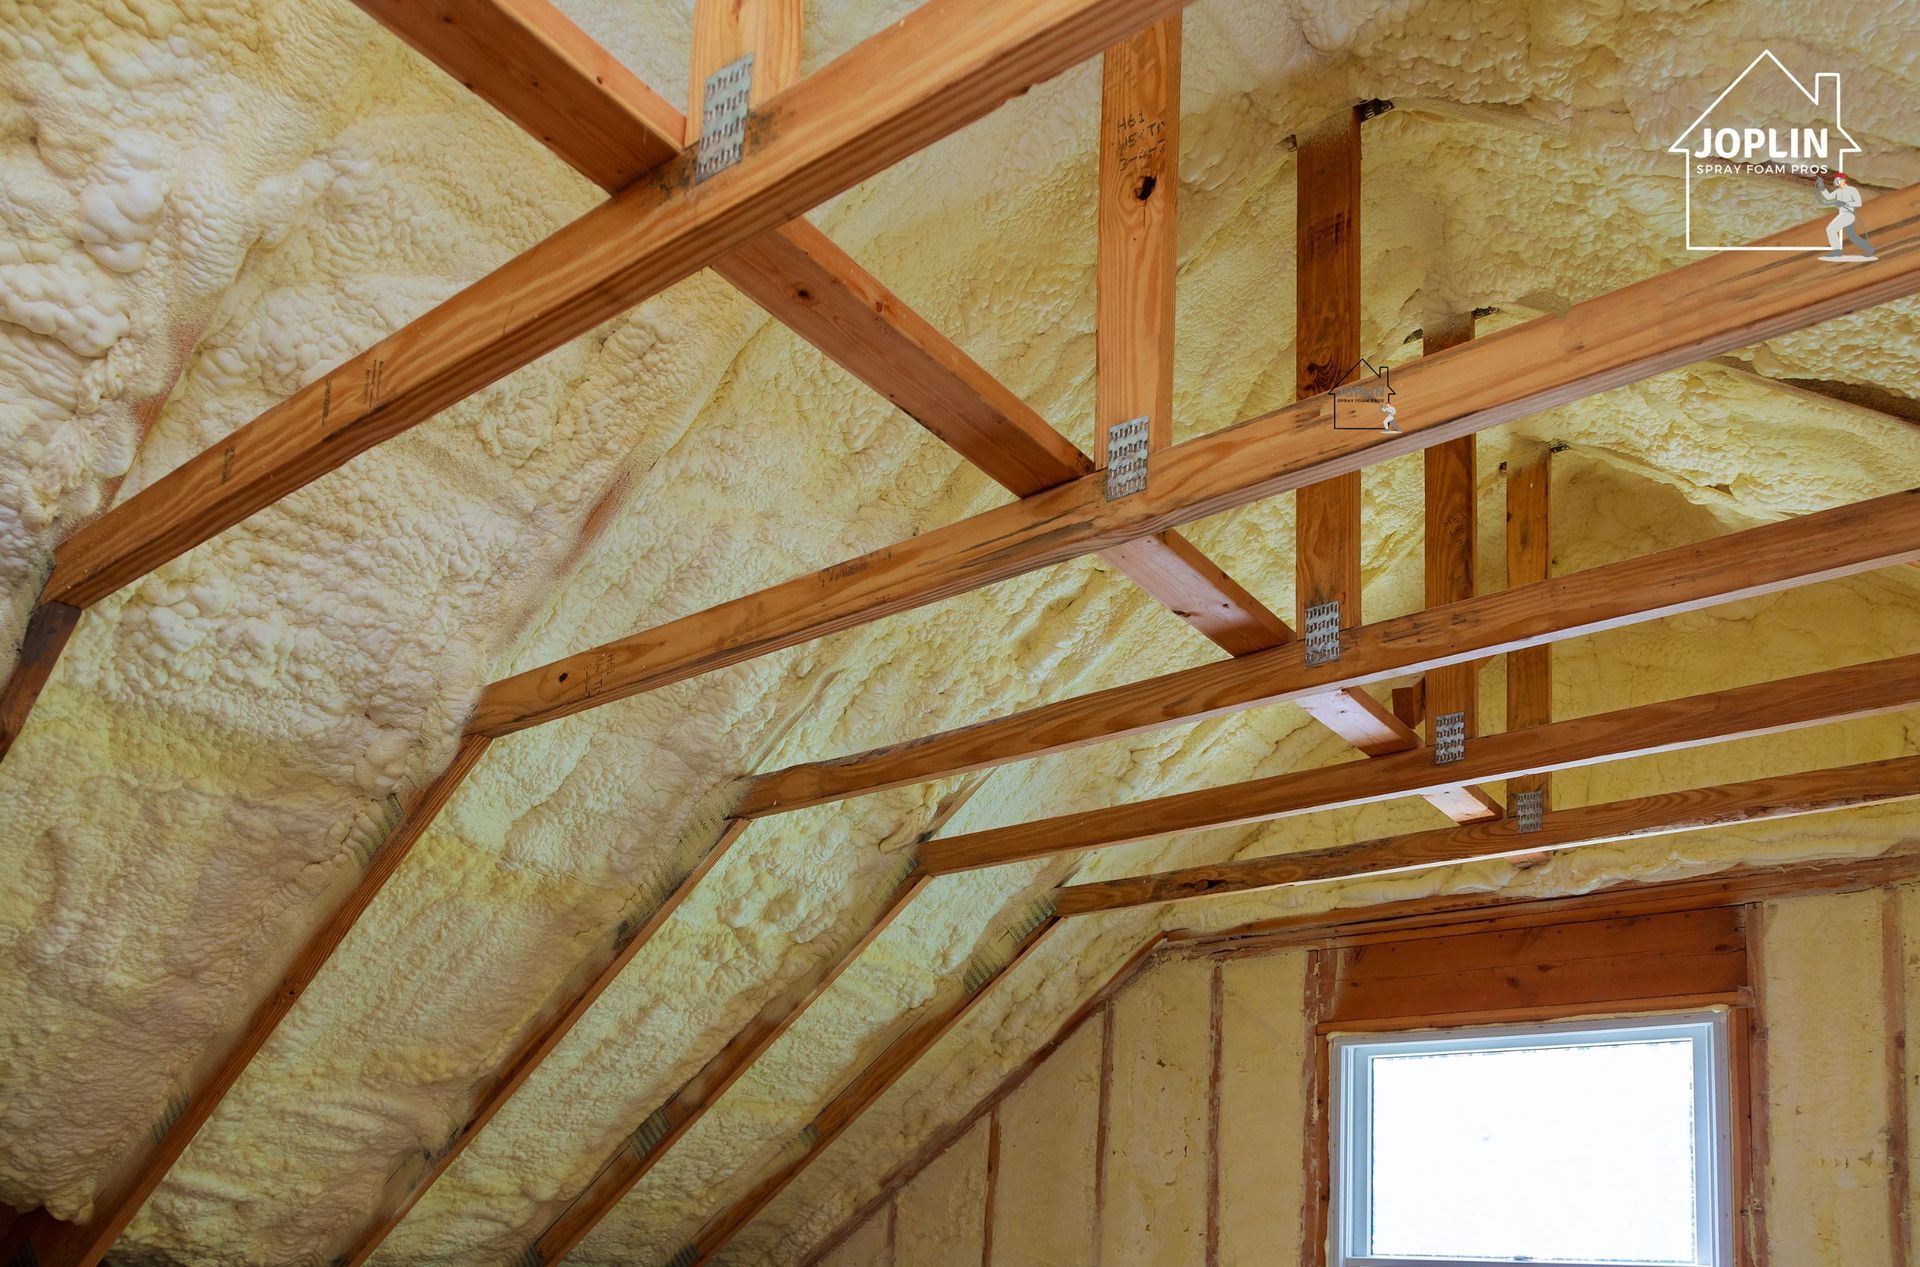 a spray foam insulation installed at a residential property in Joplin